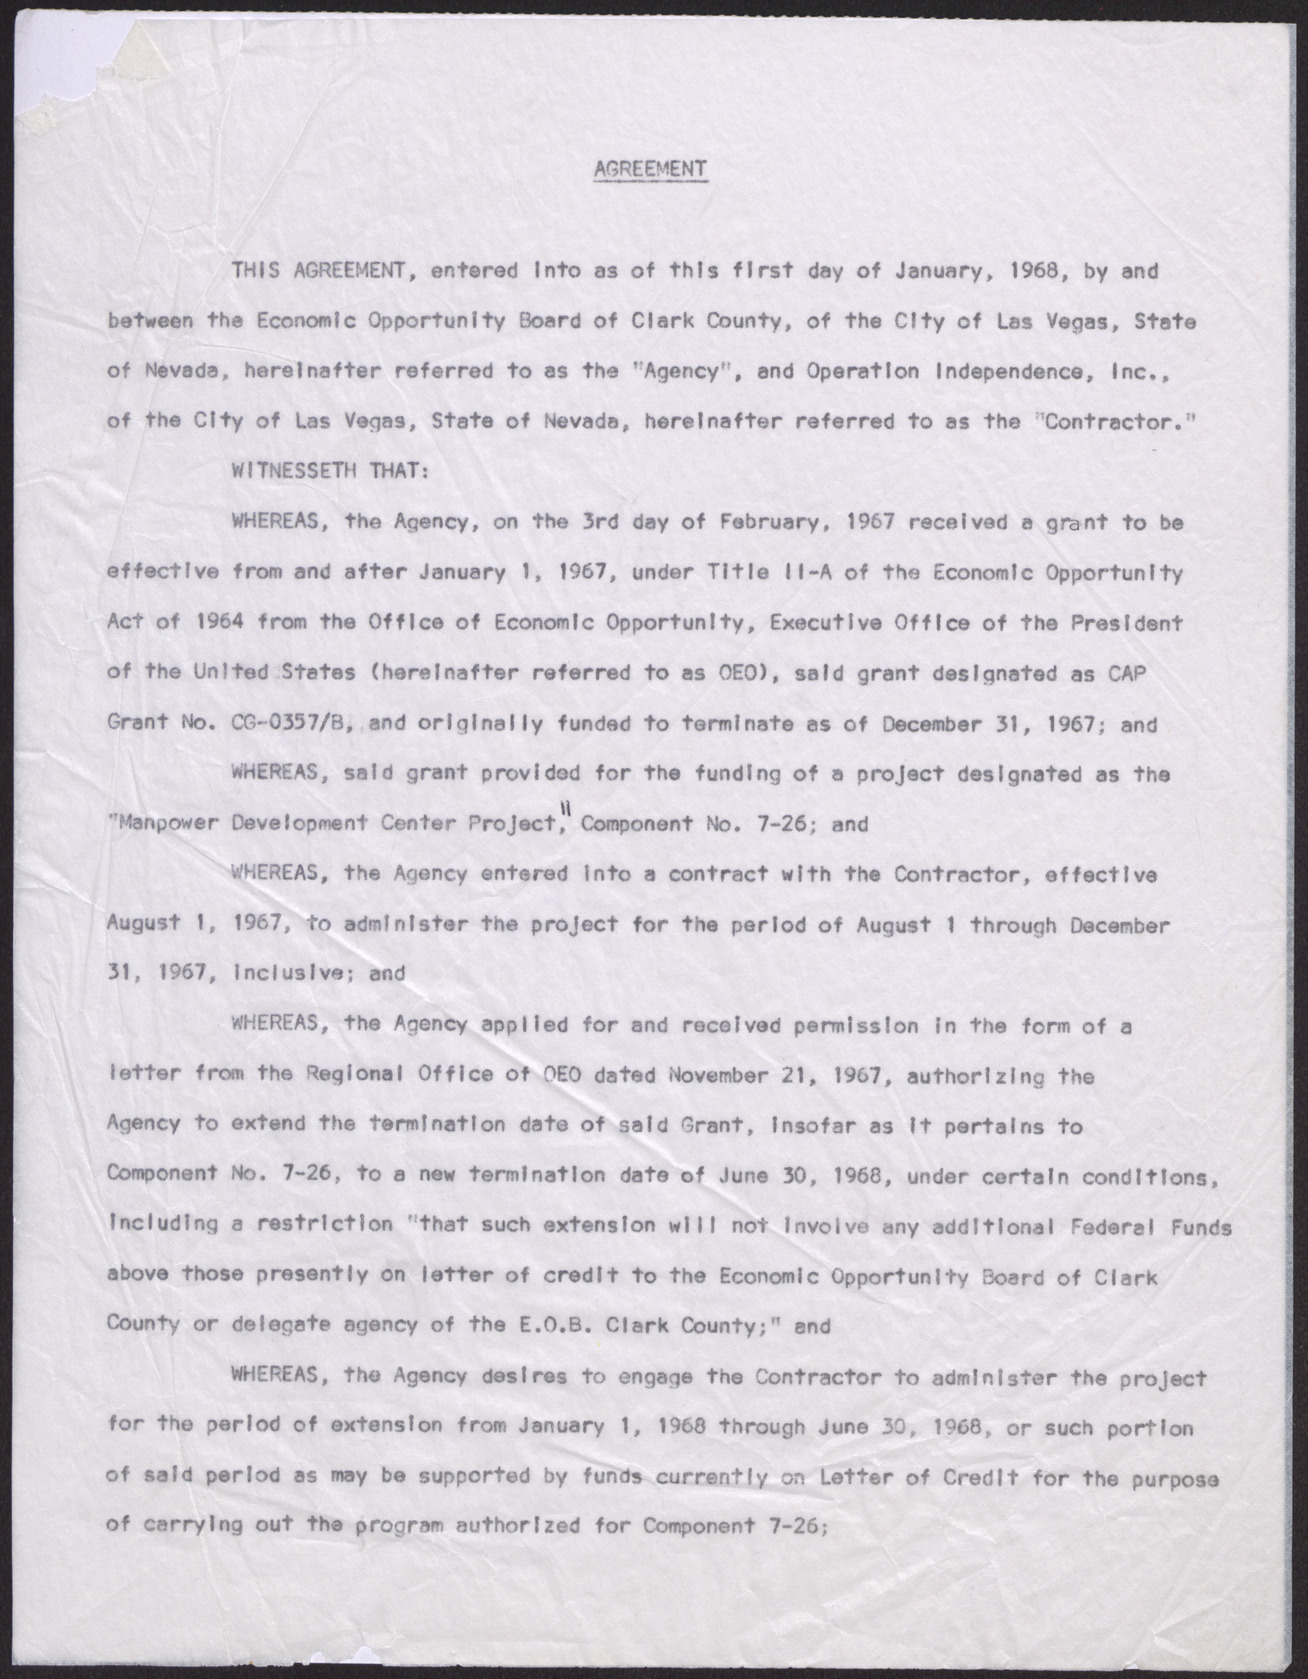 Contract of agreement between the EOB and Operation Independence, Inc., January 1, 1968